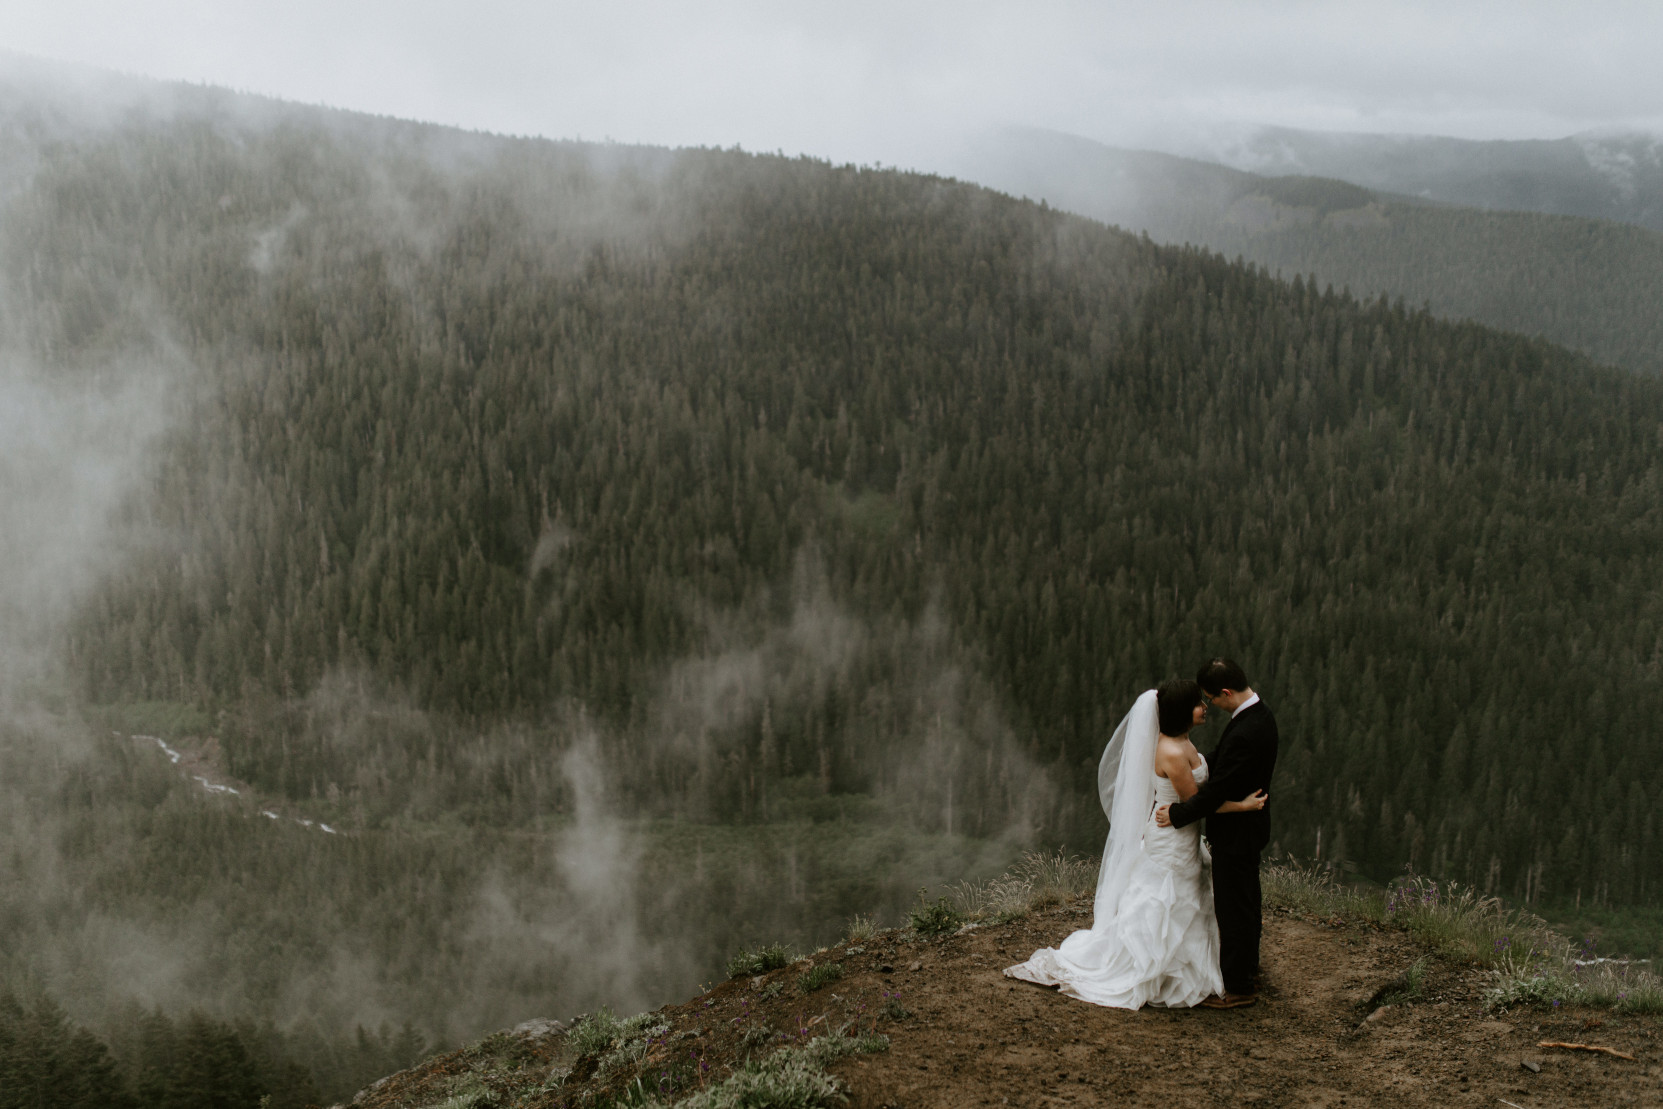 Valerie and Alex hug at Mount Hood, OR. Elopement wedding photography at Mount Hood by Sienna Plus Josh.